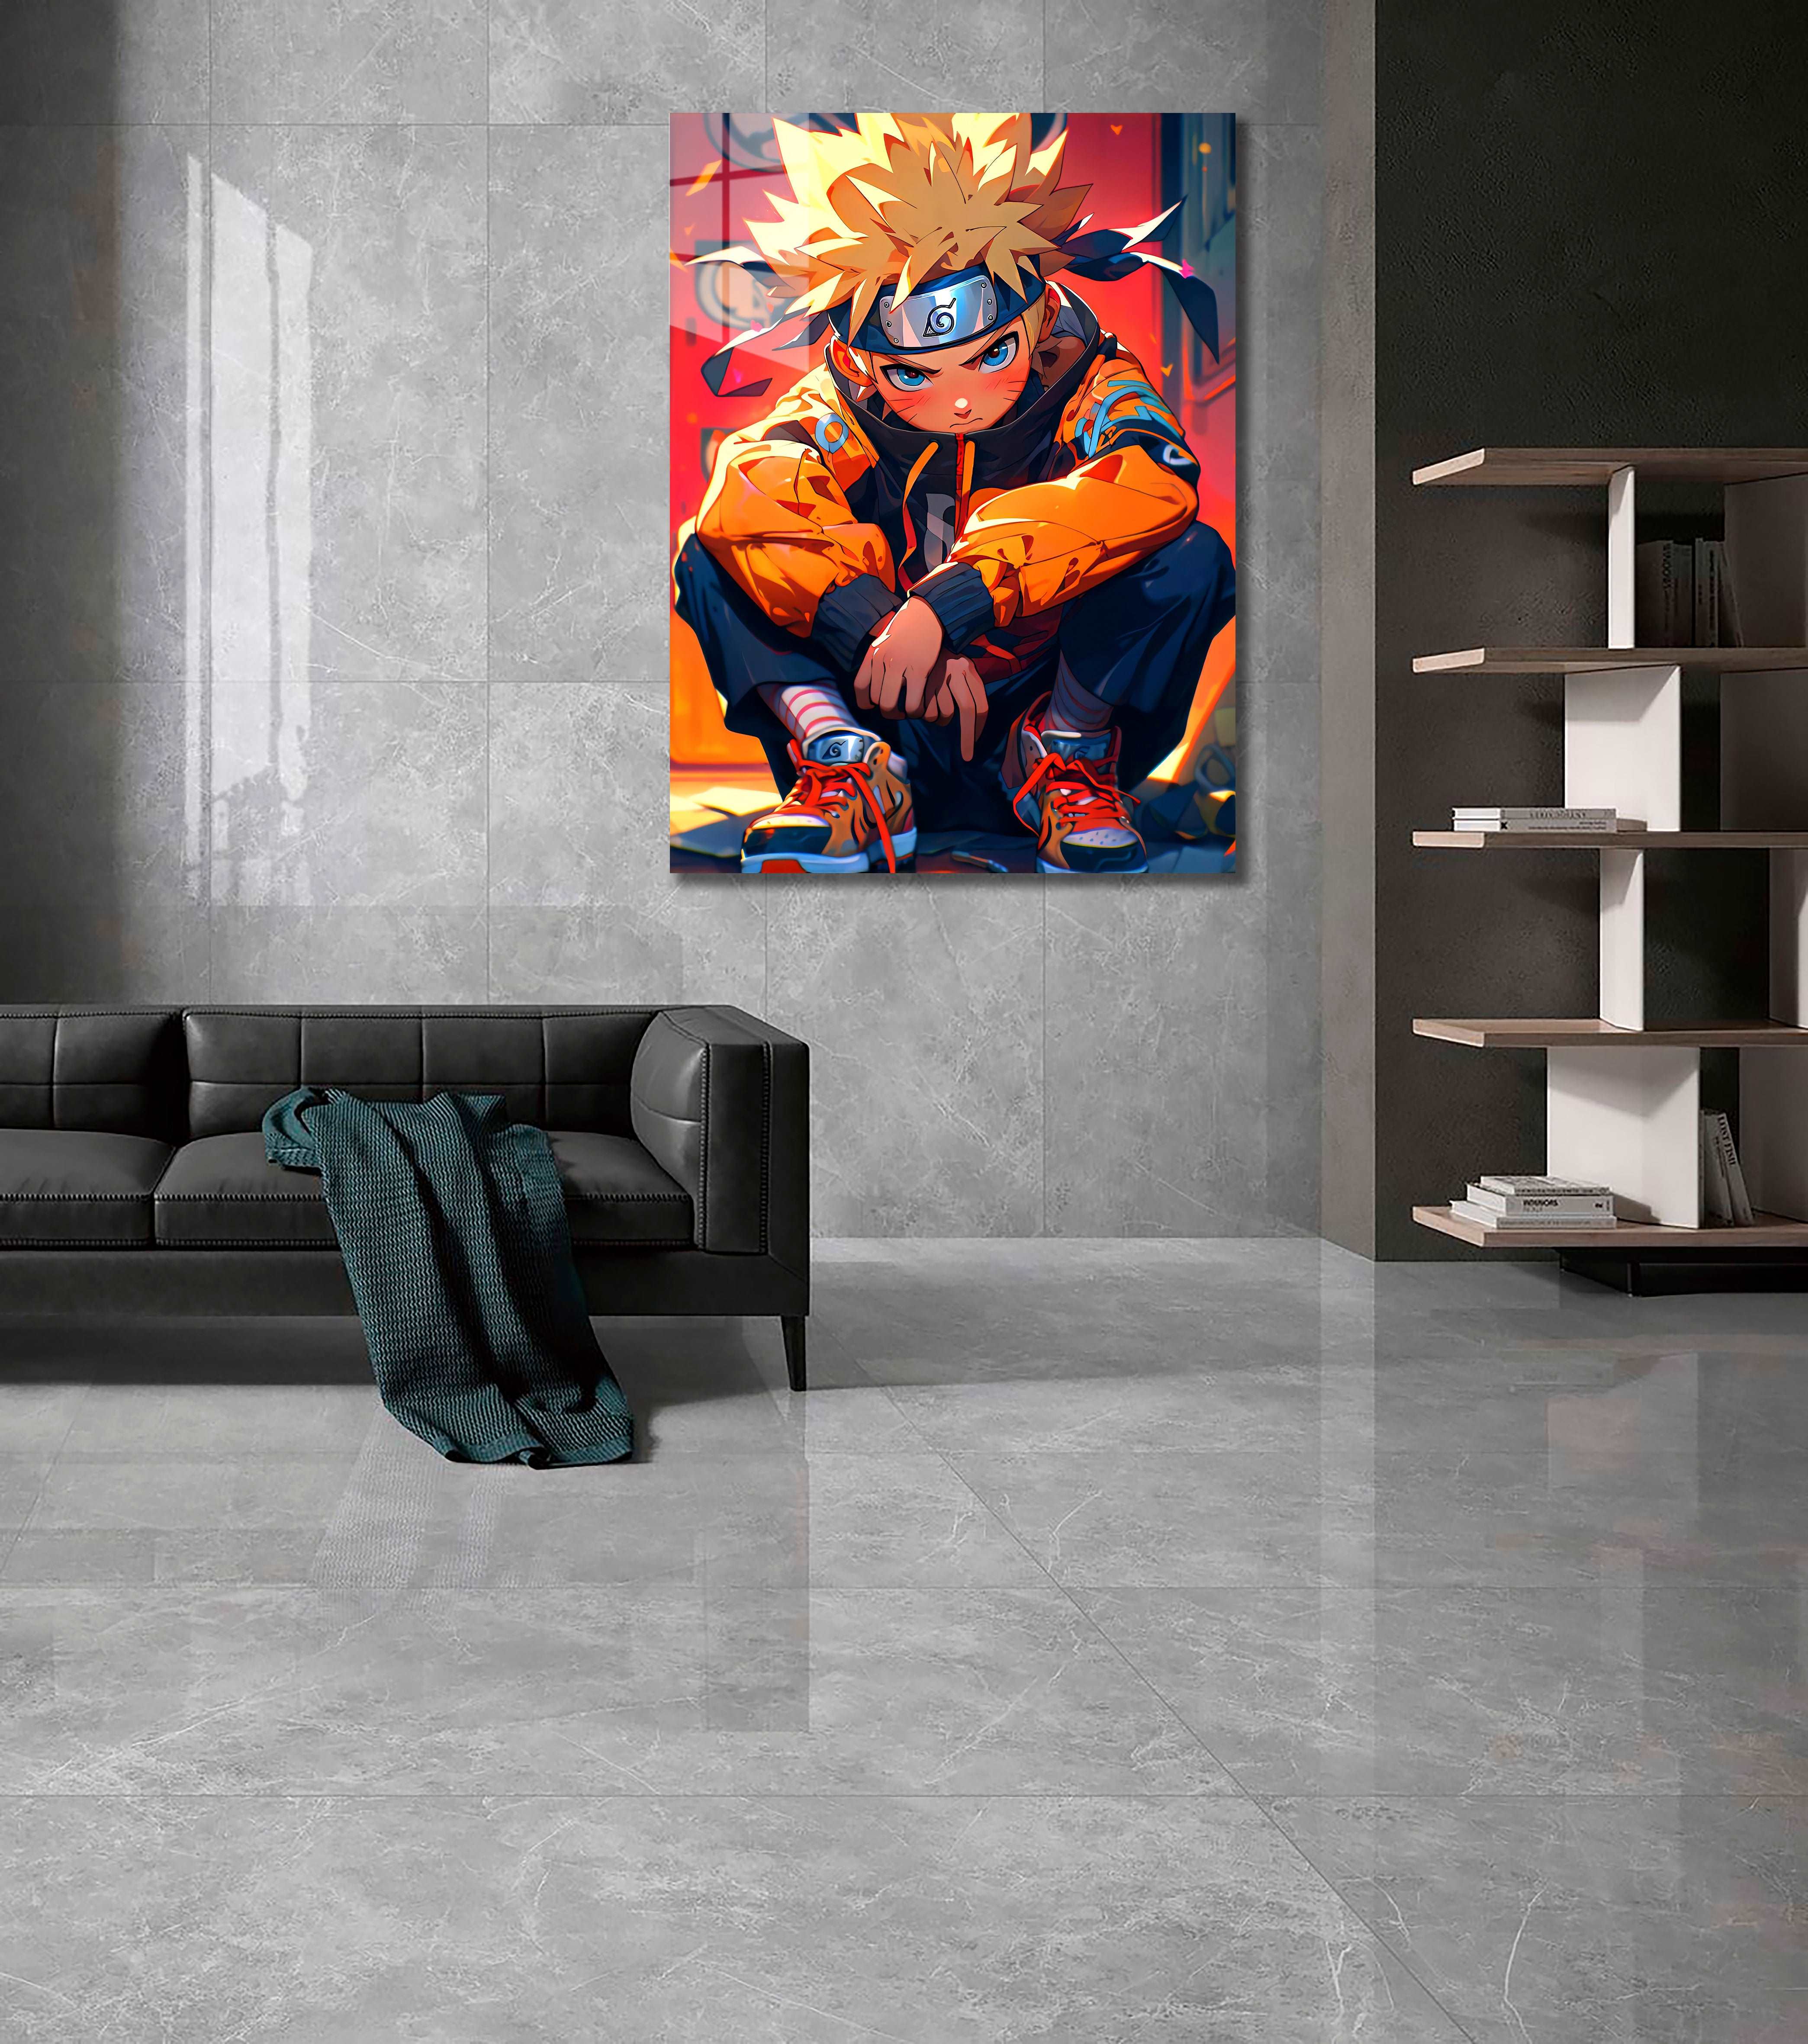 Chint naruto-Artwork by @By_Monkai